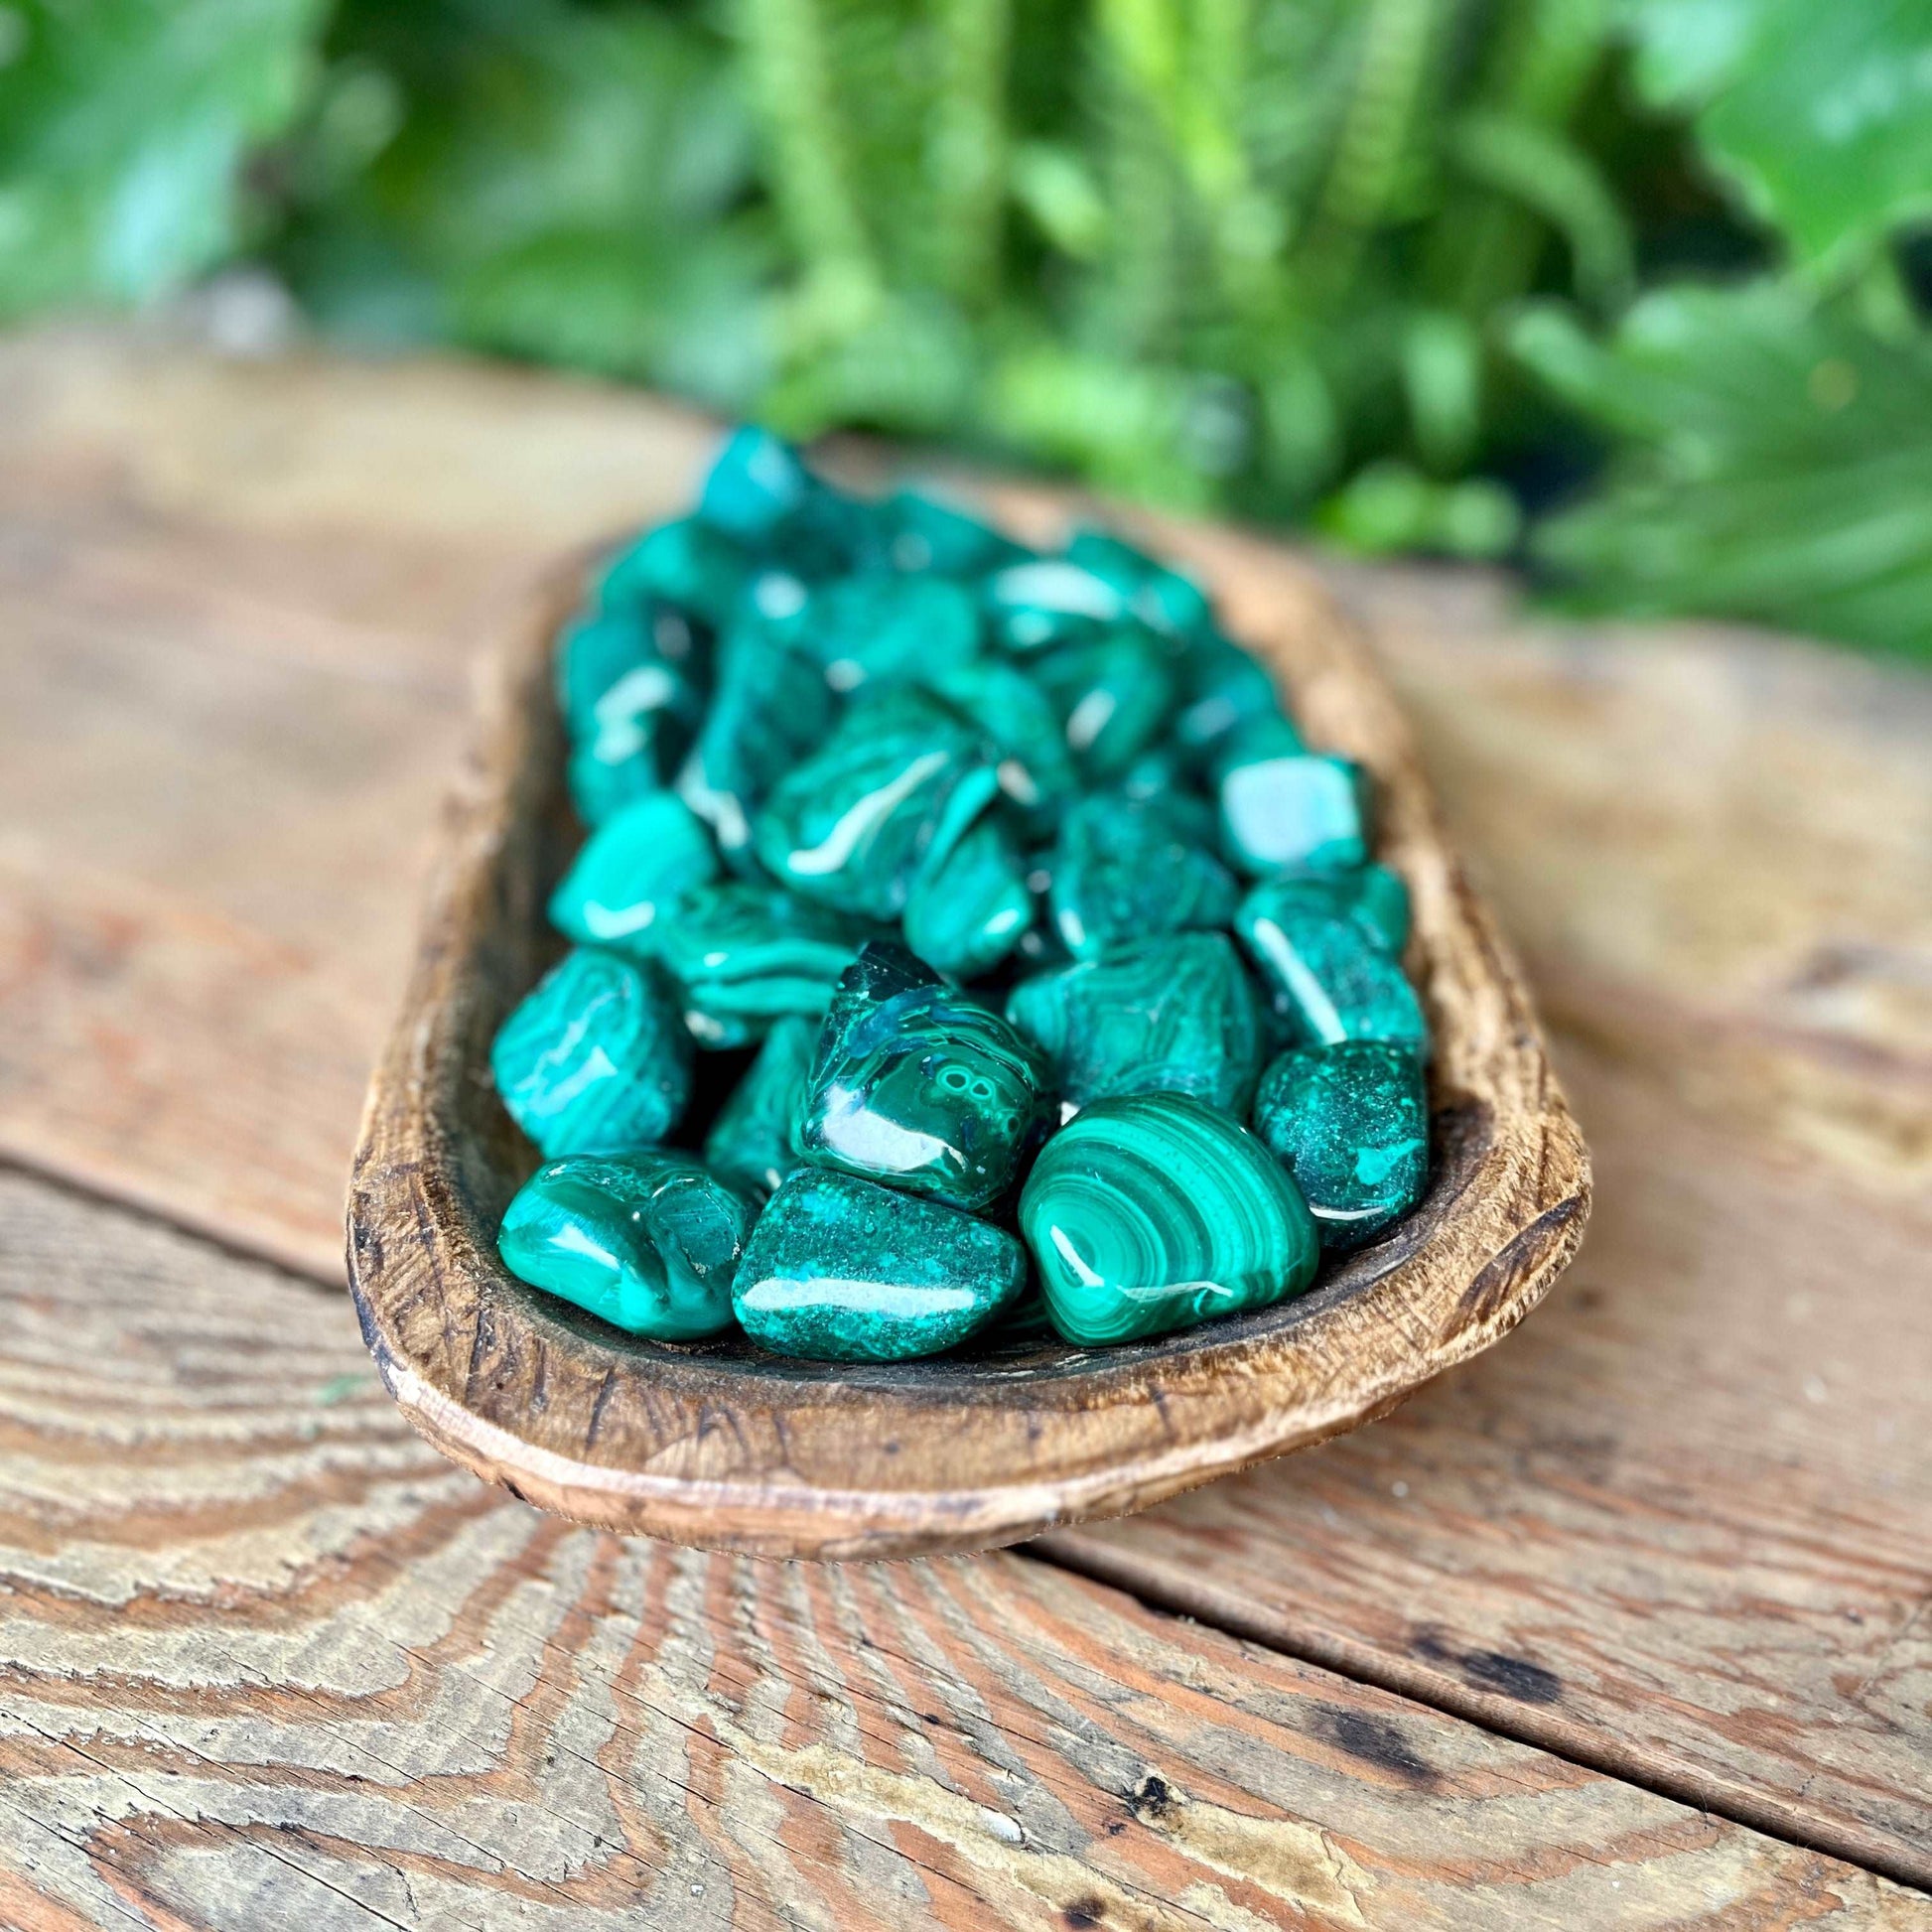 Malachite Tumbled Crystal - Absorb the lush green energies of Malachite. Known for its transformative properties, Malachite is believed to bring healing and positive change. Embrace the protective and revitalizing qualities of Malachite.